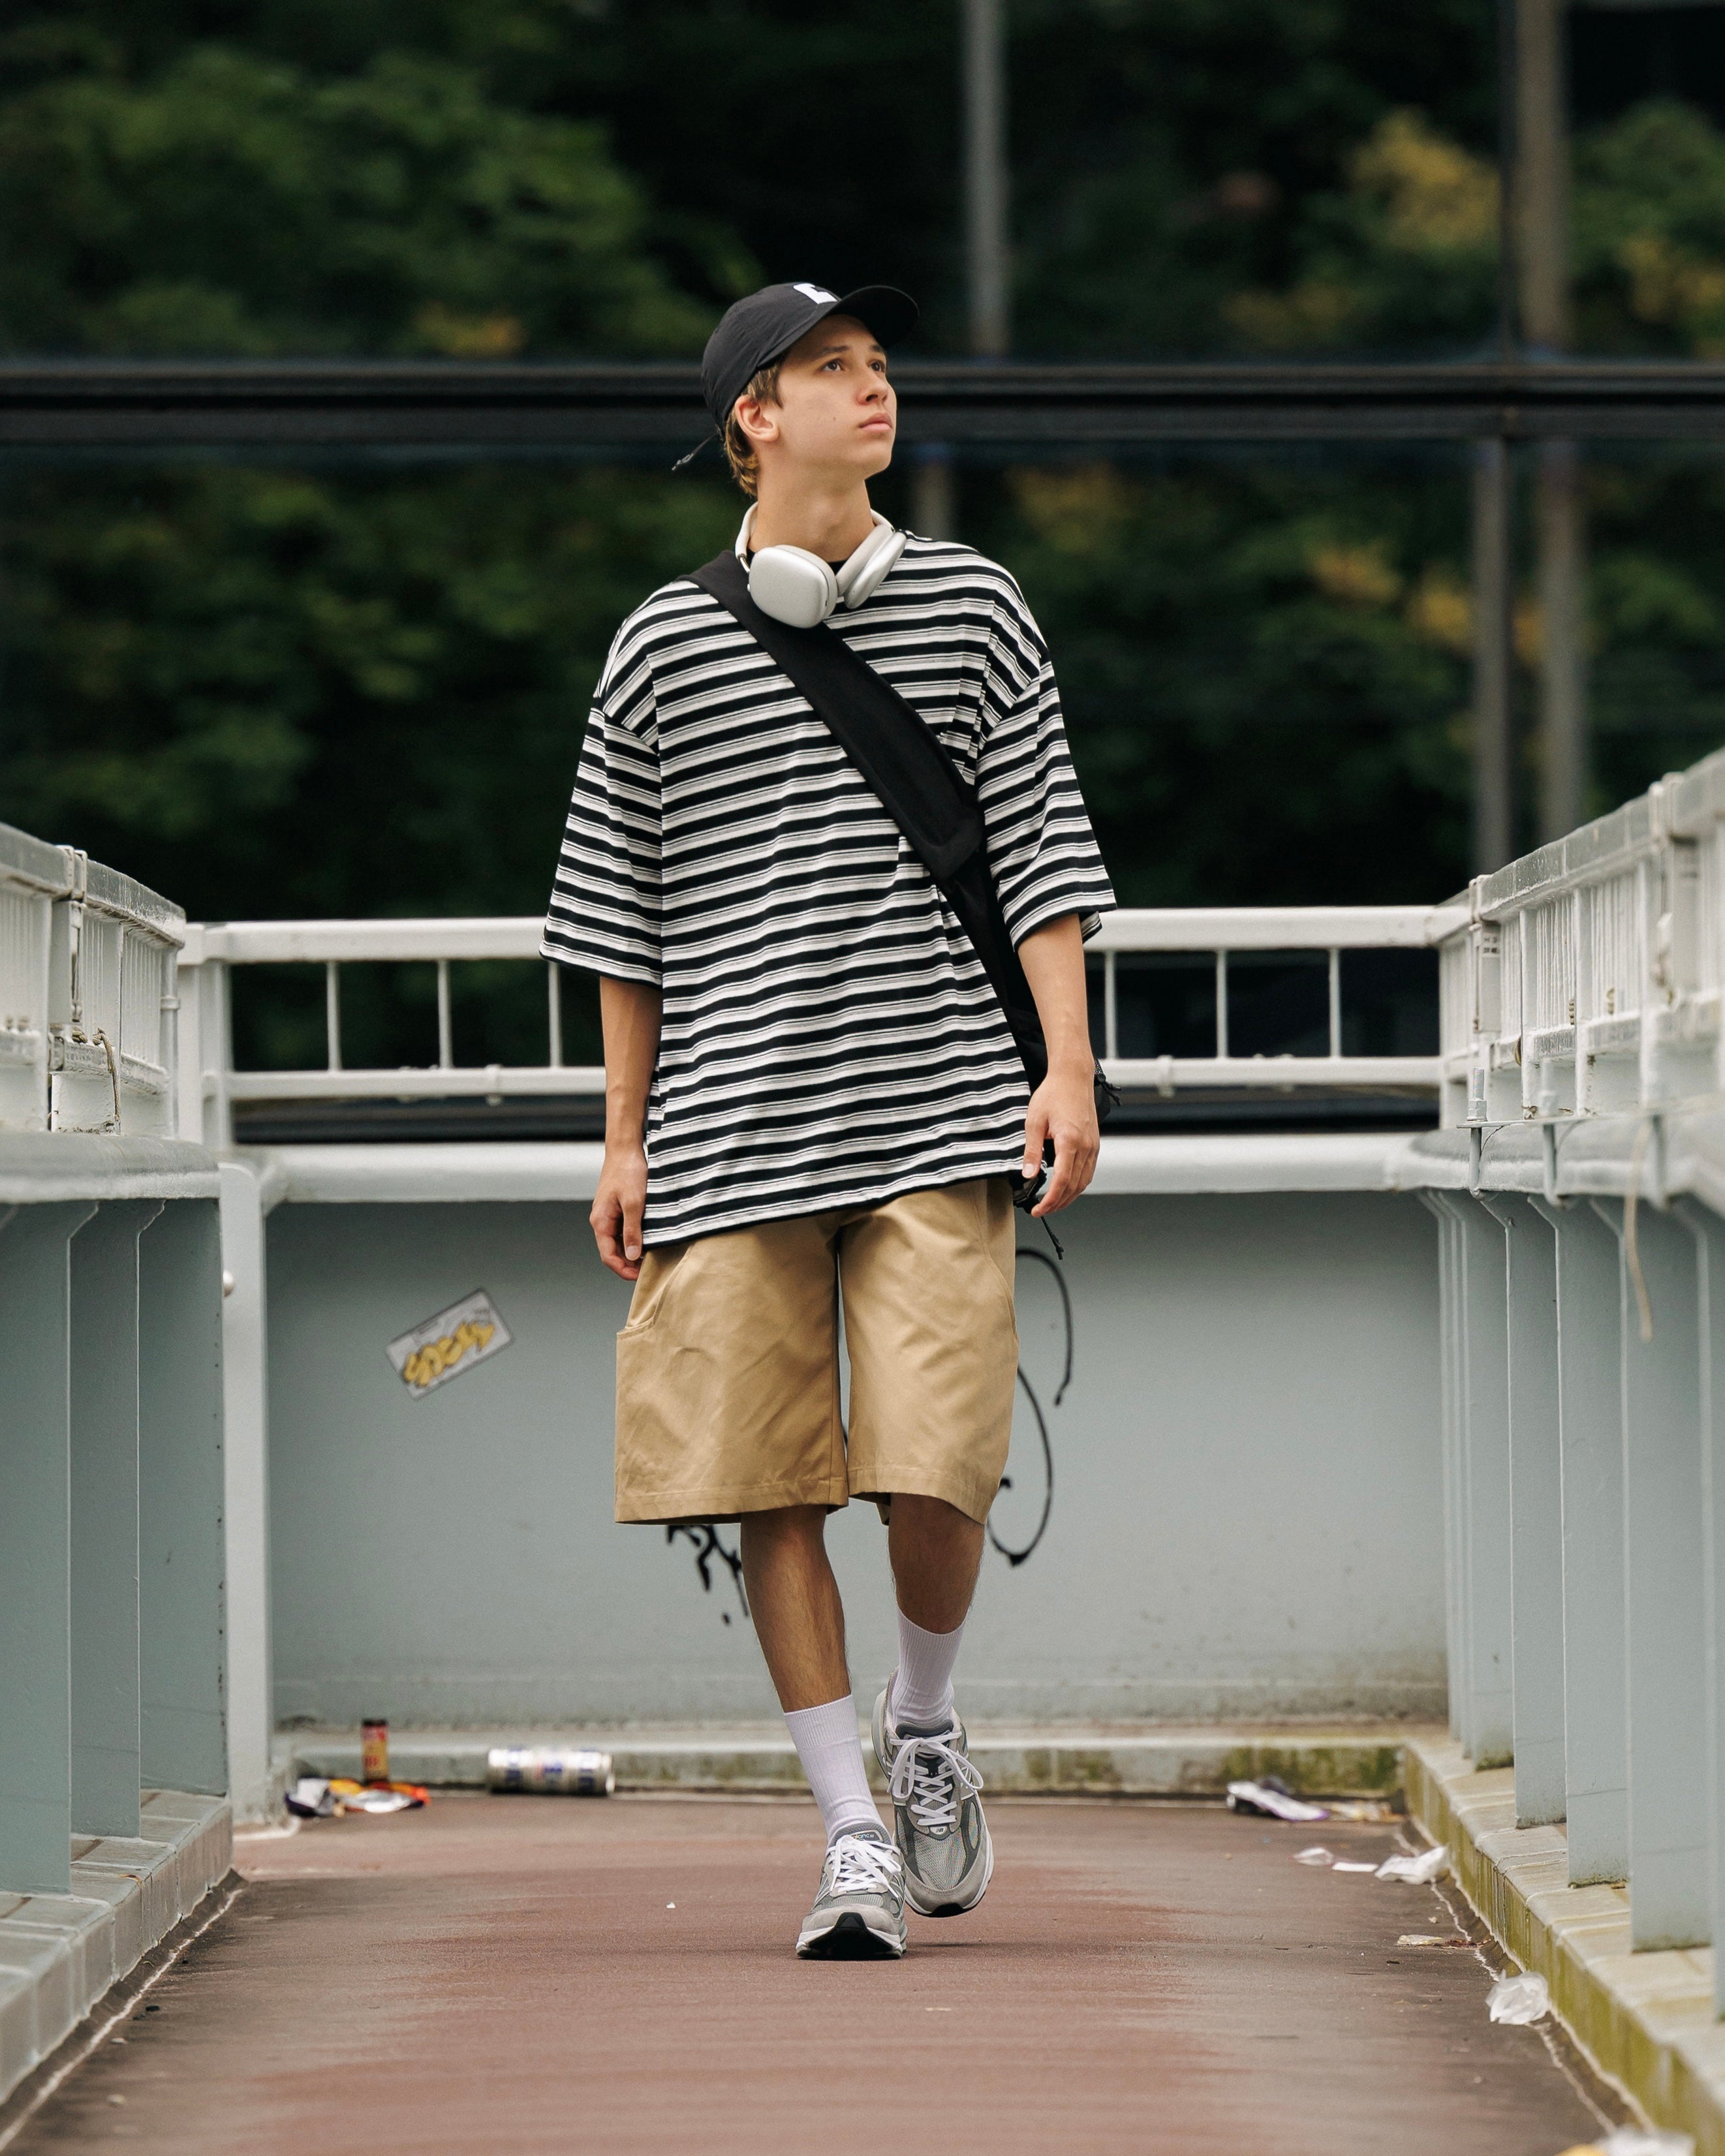 【7.3 WED 20:00- IN STOCK】MULTI STRIPED MASSIVE T-SHIRT WITH DRAWSTRINGS.